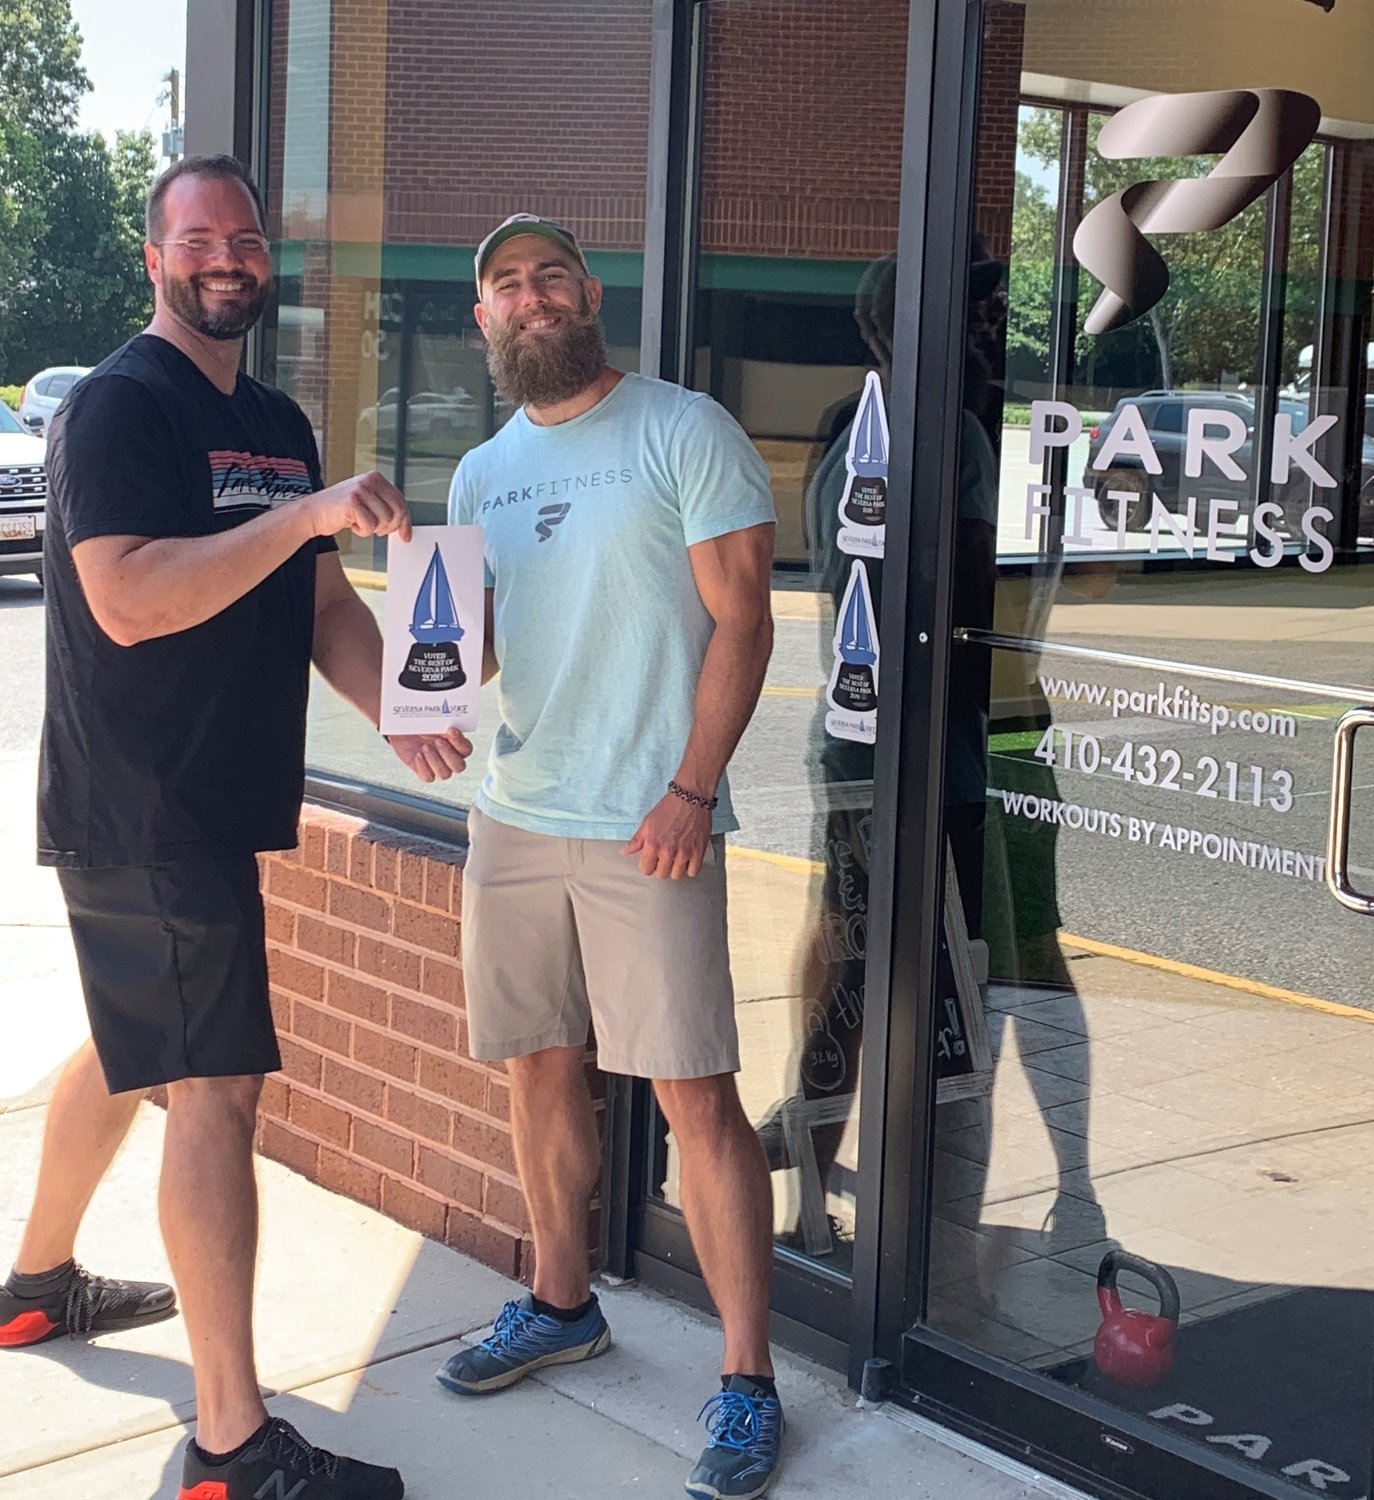 On behalf of Park Fitness, Joe Bocek (left) and Danny O’Malley accepted the Best Of award for Best Fitness Club, Best Weight Loss Program, and Best Overall Customer Service.